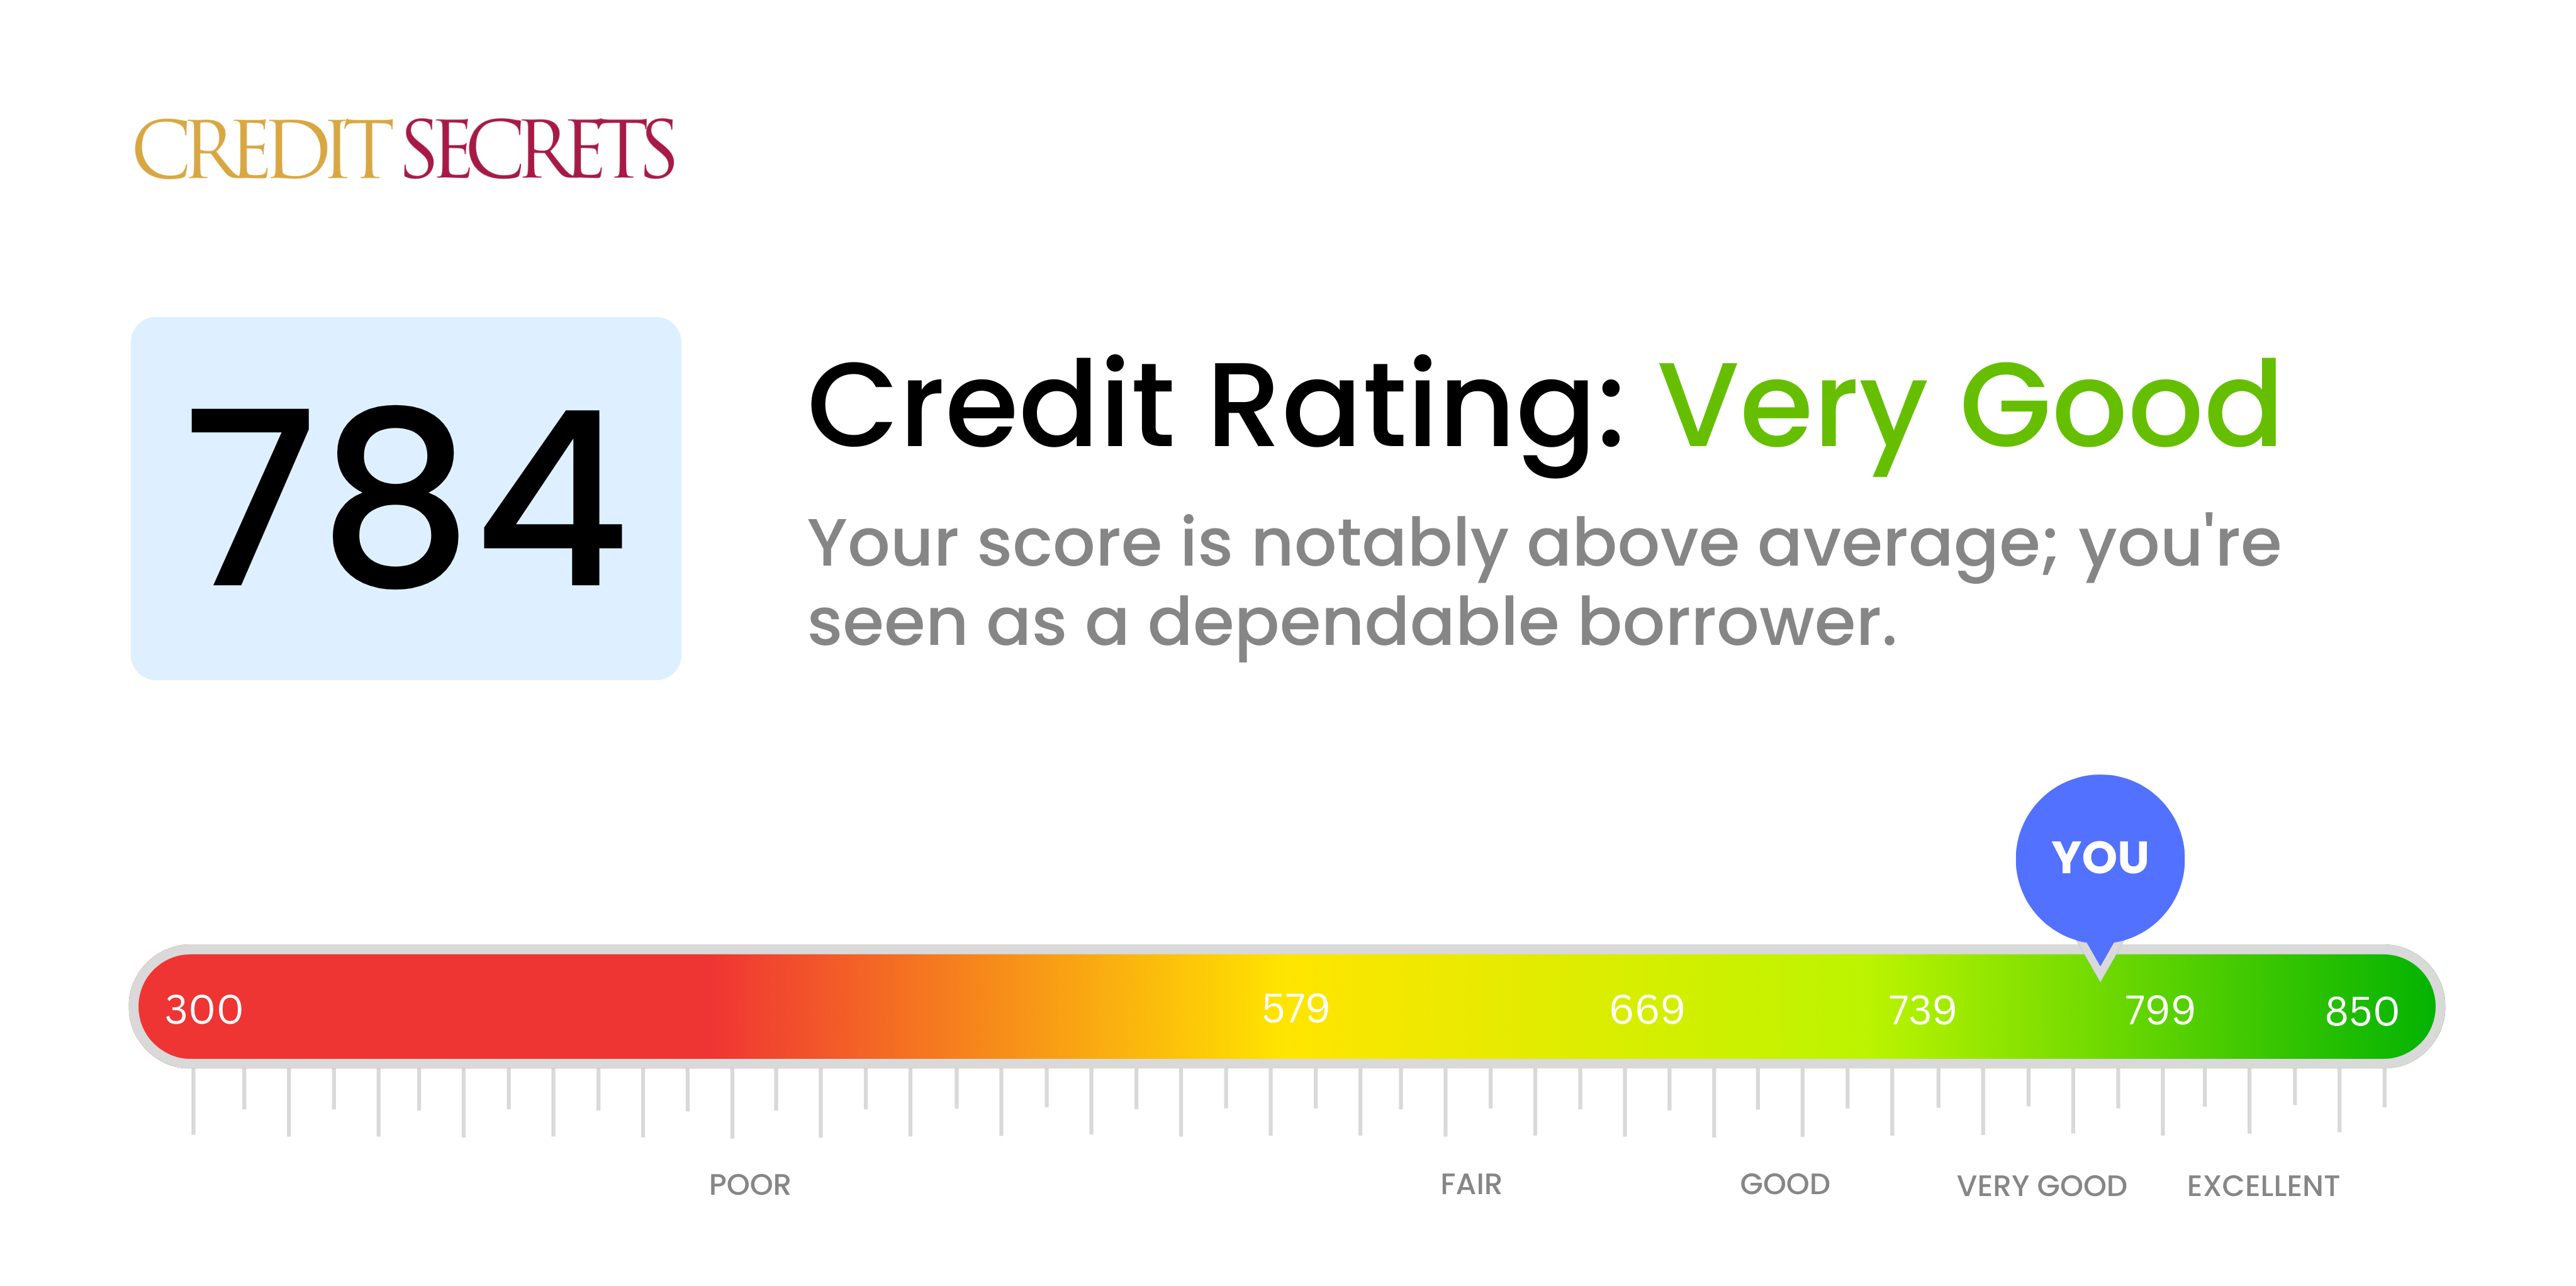 Is 784 a good credit score?